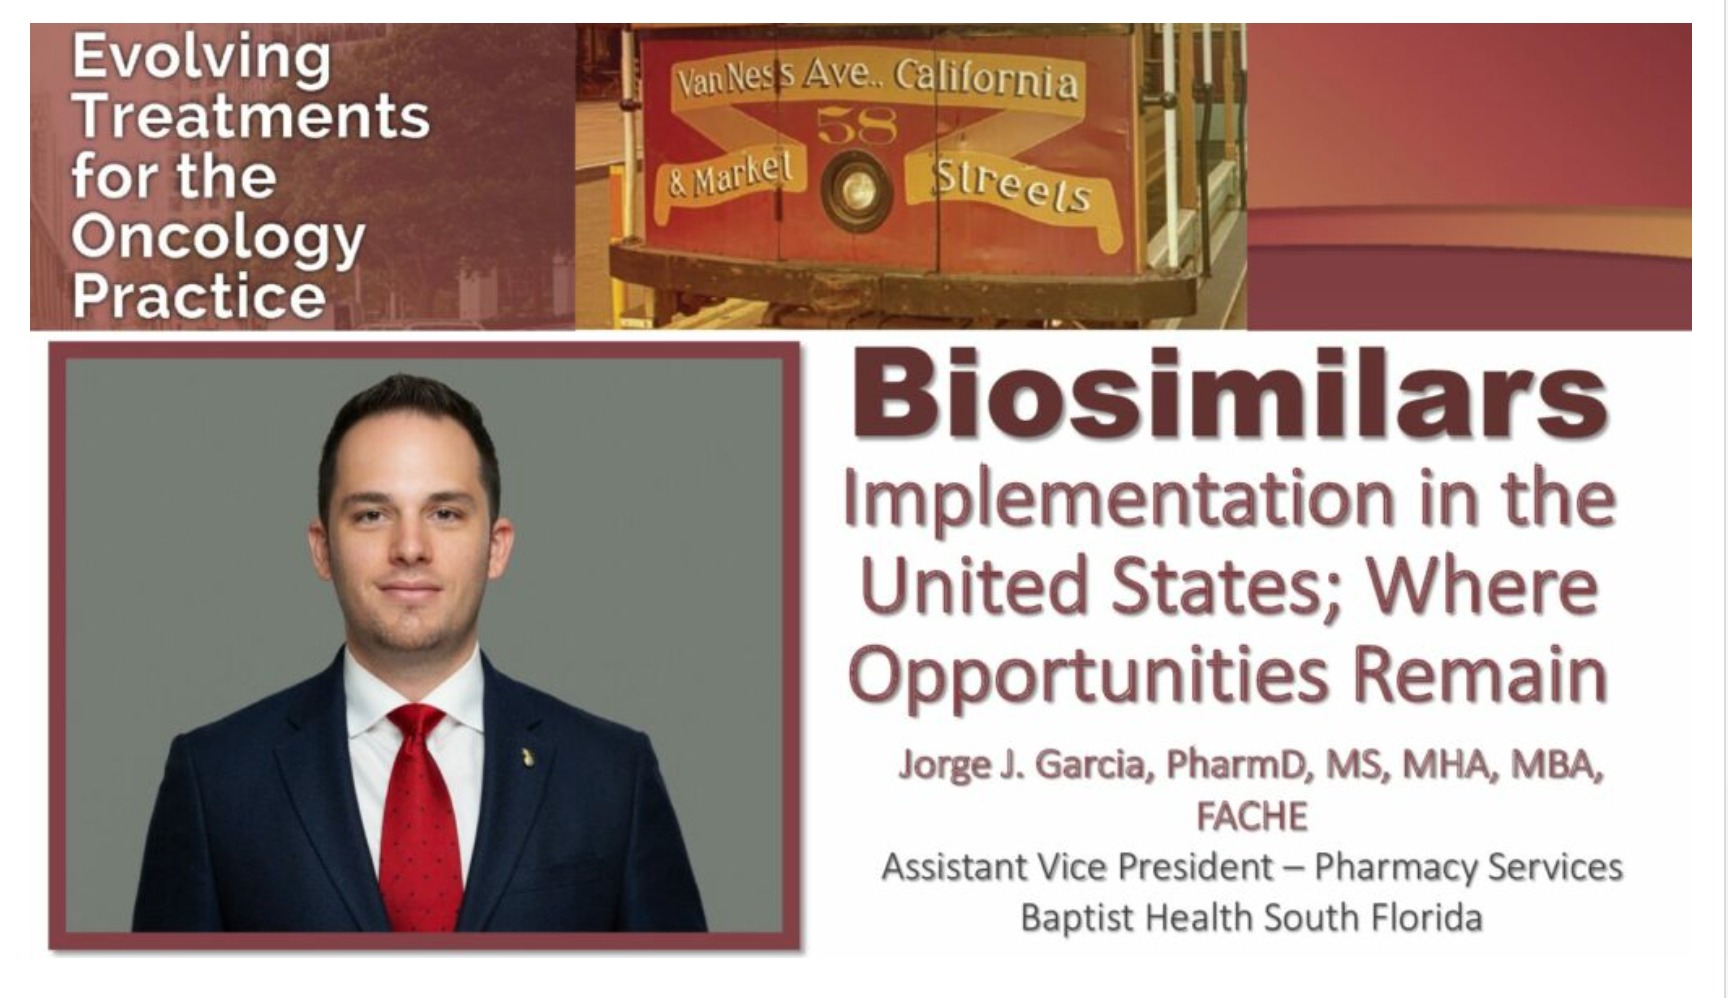 Biosimilars Implementation in the United States: Where Opportunities Remain